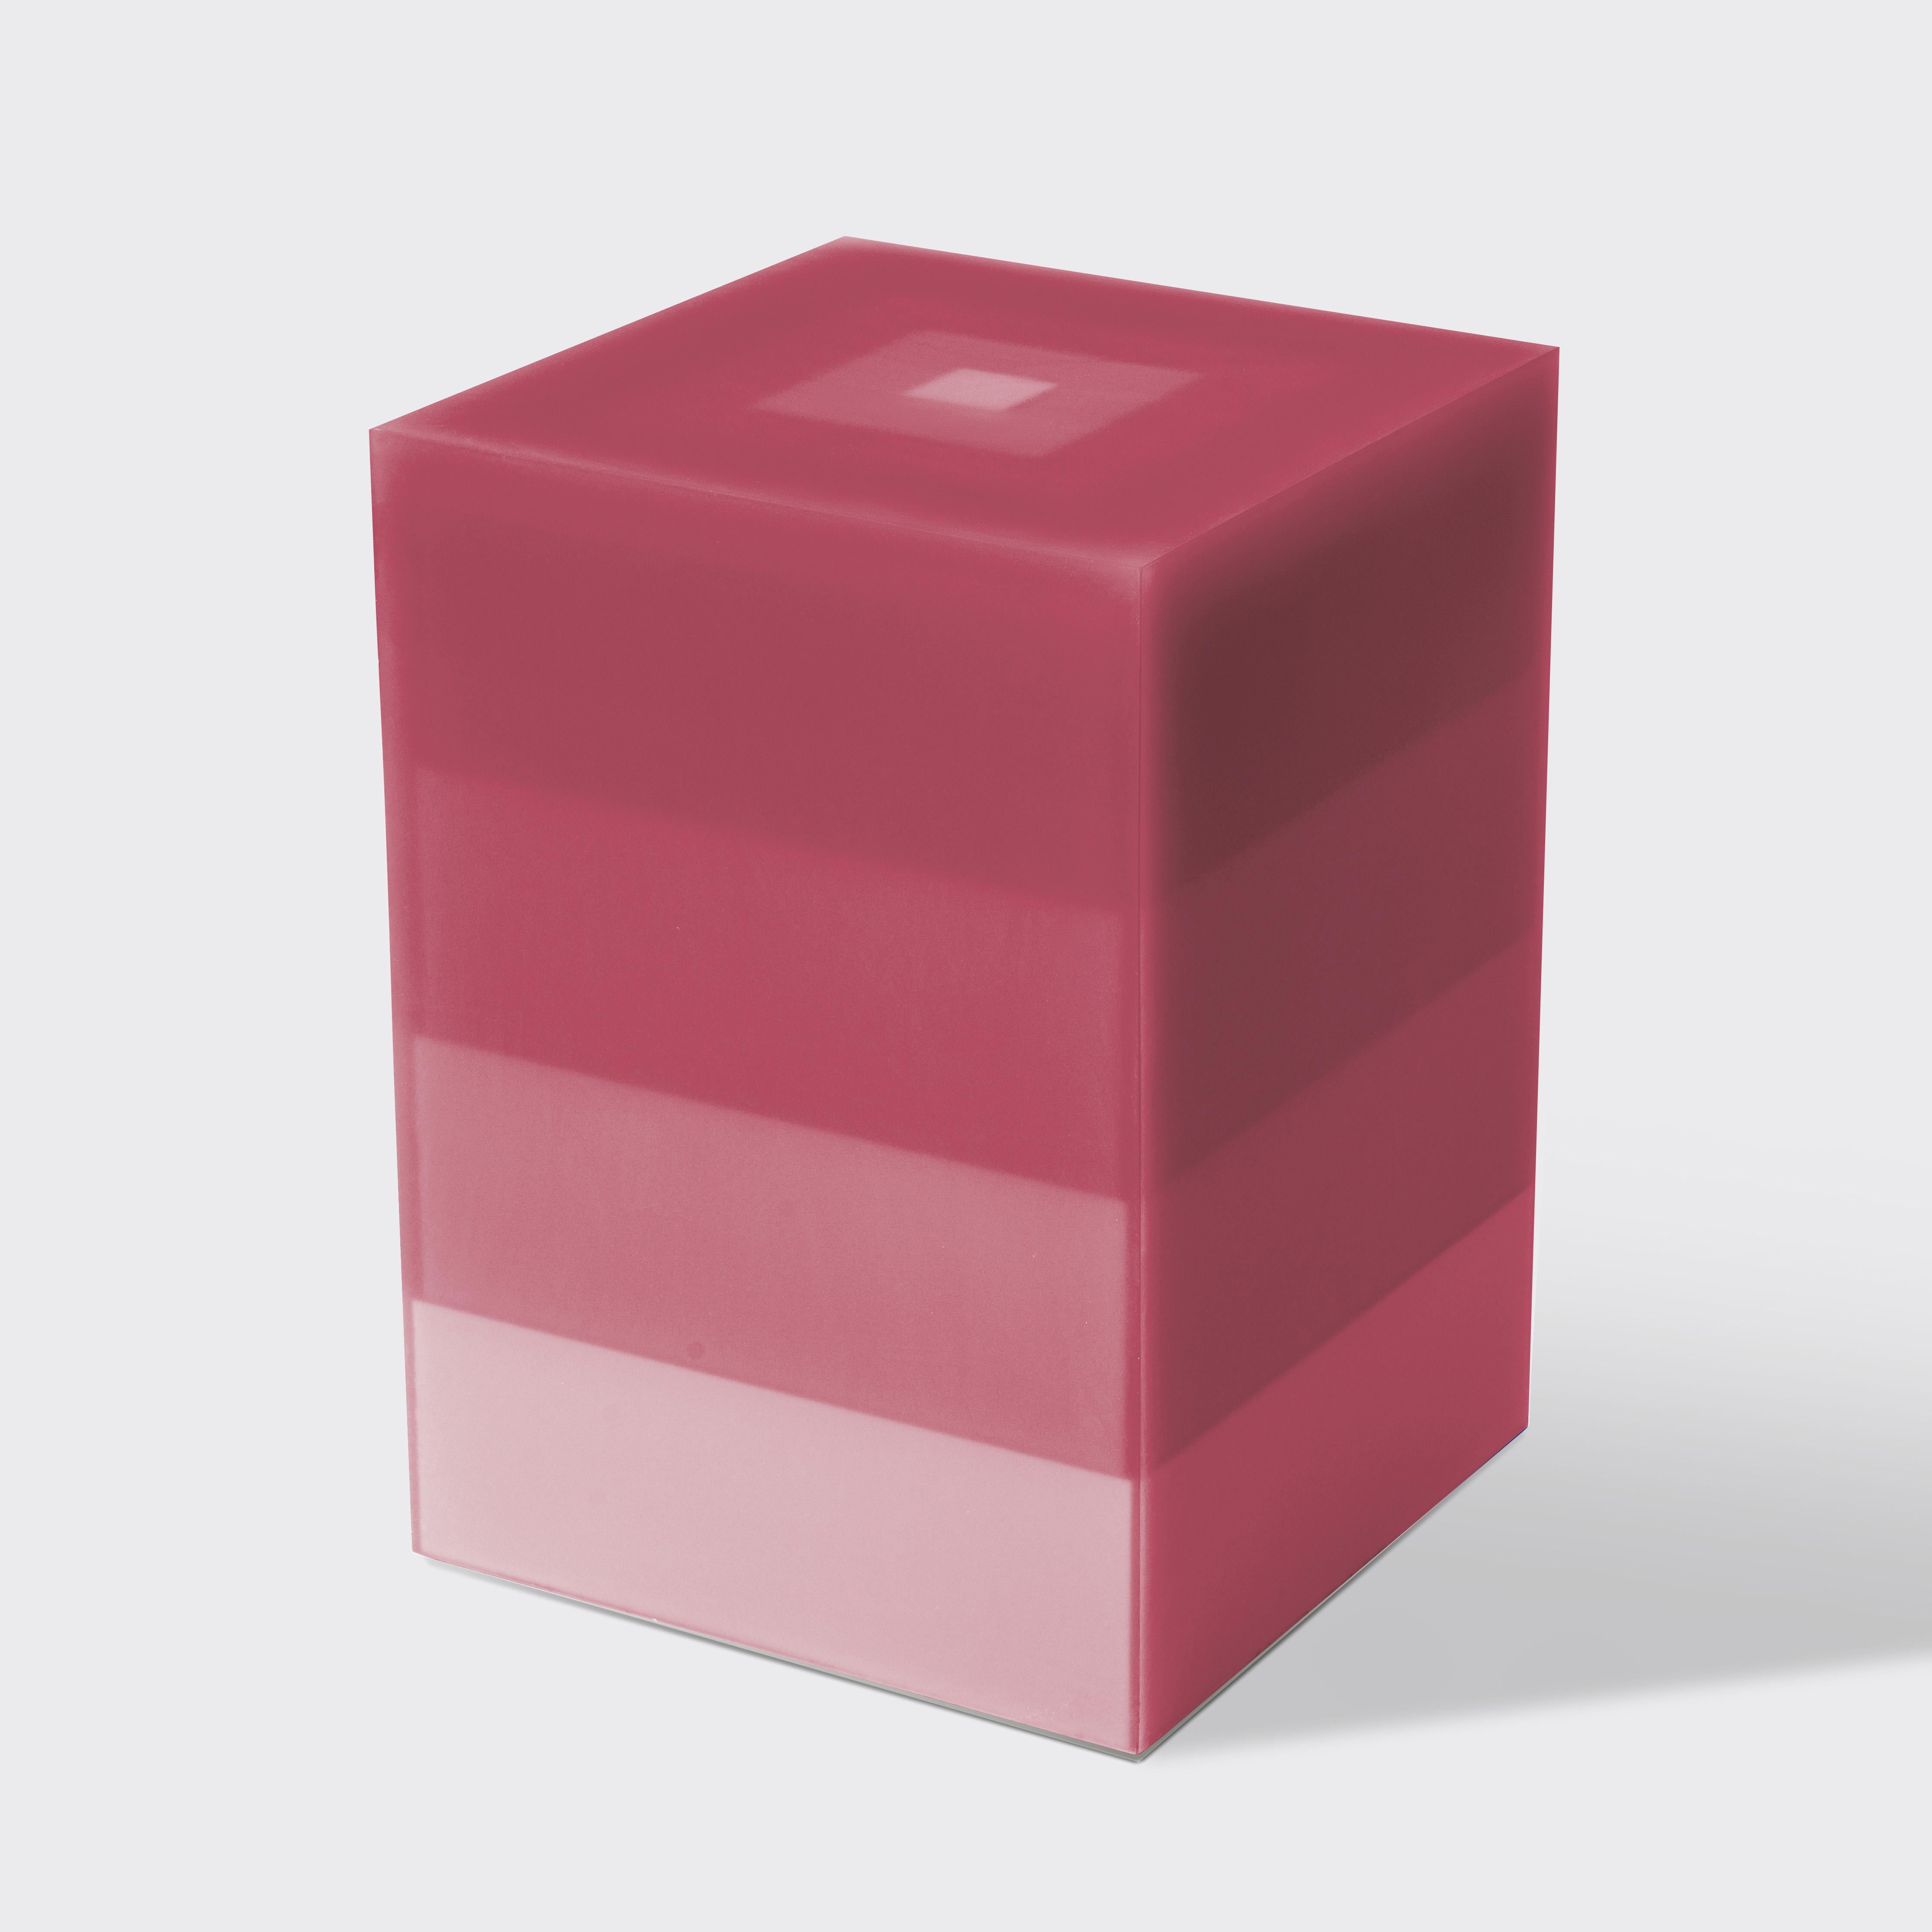 Scale Pyramid Resin Side Table/Stool in Pink by Facture, REP by Tuleste Factory In New Condition For Sale In New York, NY